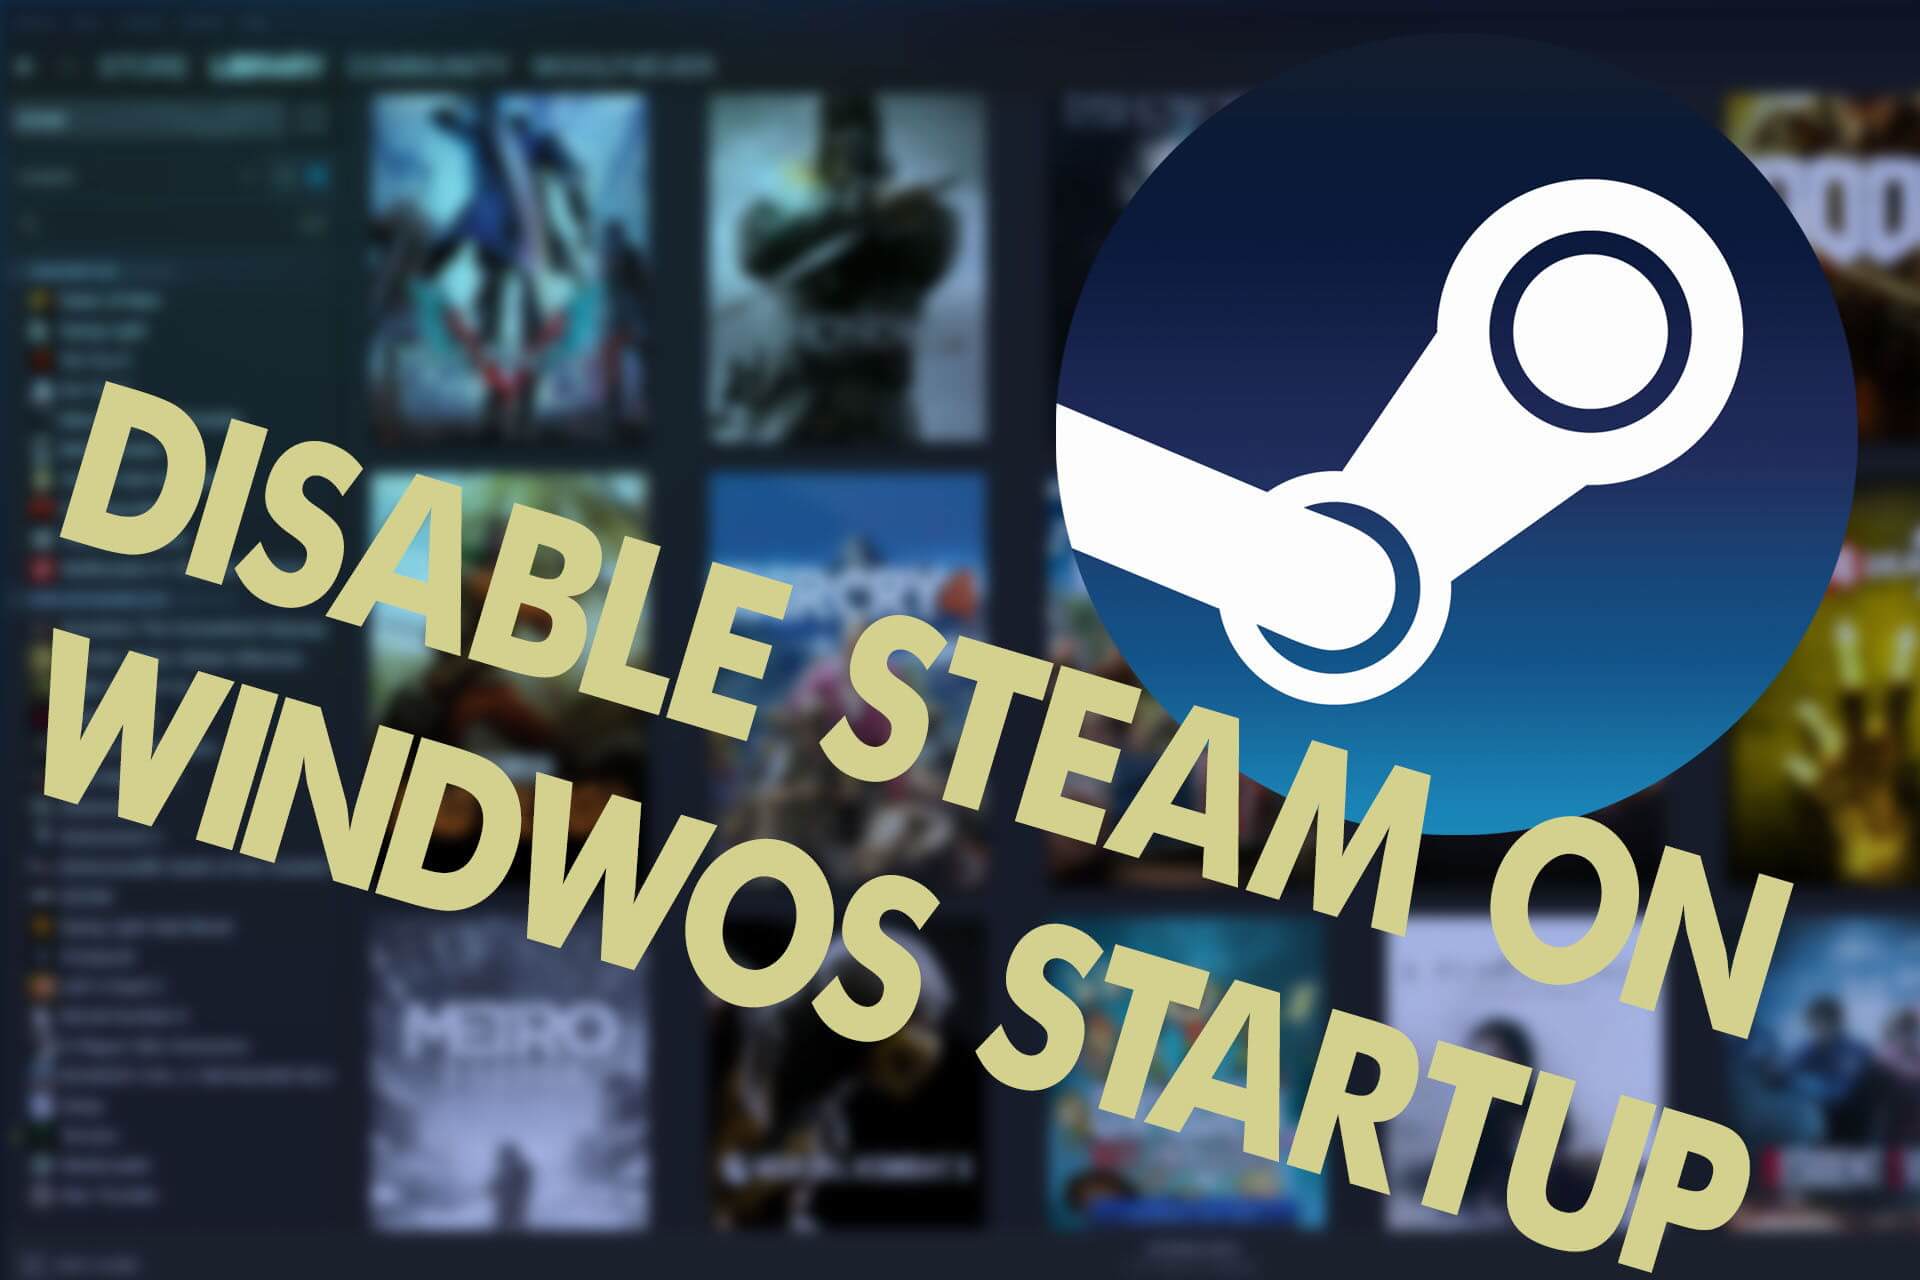 how to stop steam workshop downloads